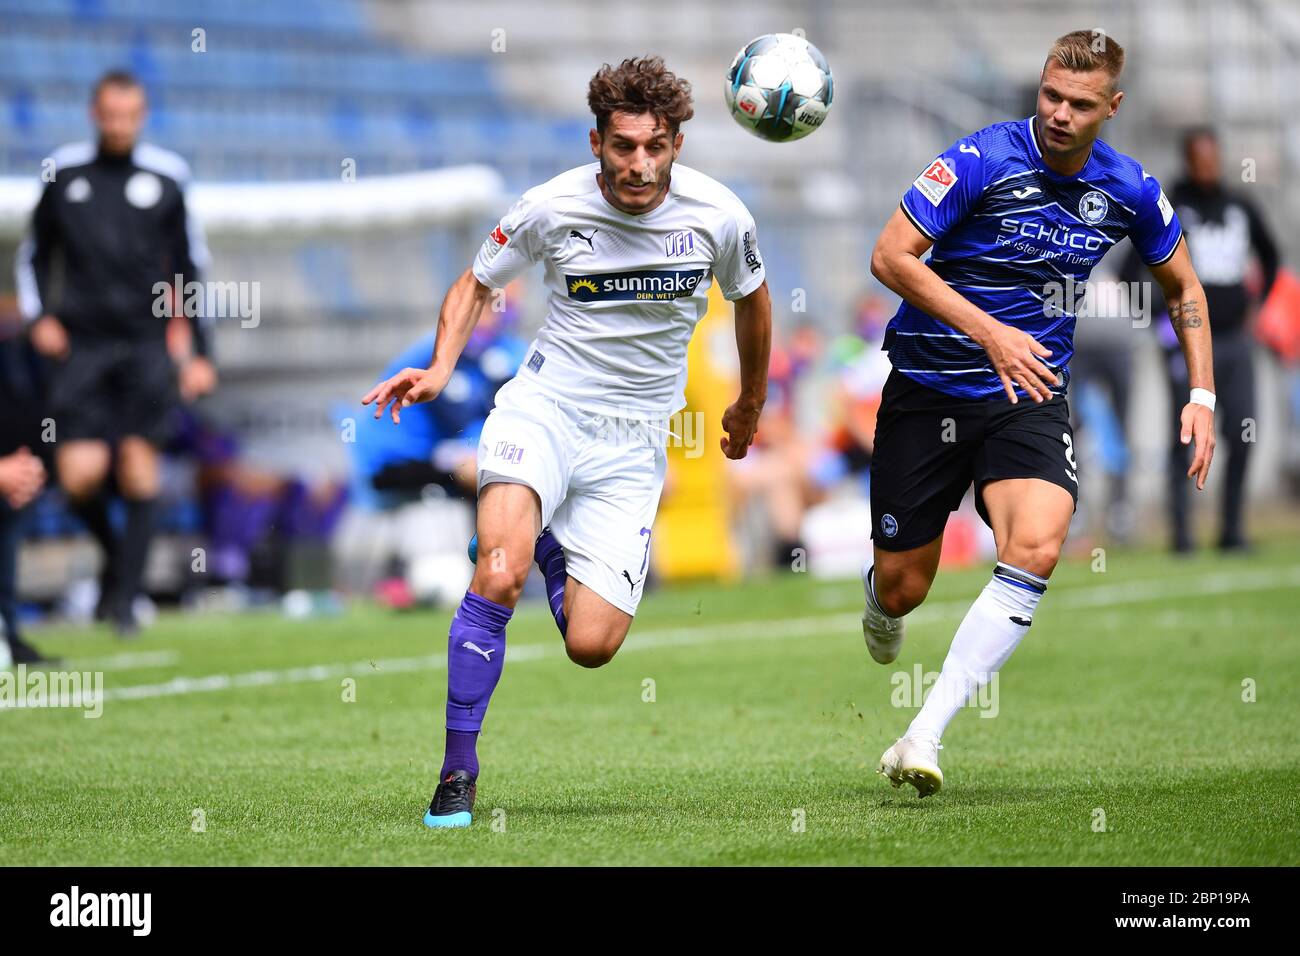 Westphalia, Germany. 17th May, 2020. FILED - 17 May 2020, North Rhine-Westphalia, Bielefeld: Football, 2nd Bundesliga, DSC Arminia Bielefeld - VfL Osnabrück, 26th matchday, Schüco-Arena: Bashkim Ajdini (l) from Osnabrück and Florian Hartherz from Bielefeld in action. After a 65-day Corona break, the ball is rolling again in the Bundesliga. The matches take place without spectators. Photo: Stuart Franklin/Getty/POOL/dpa - IMPORTANT NOTE: In accordance with the regulations of the DFL Deutsche Fußball Liga and the DFB Deutscher Fußball-Bund, it is prohibited to exploit or have exploited in the st Stock Photo